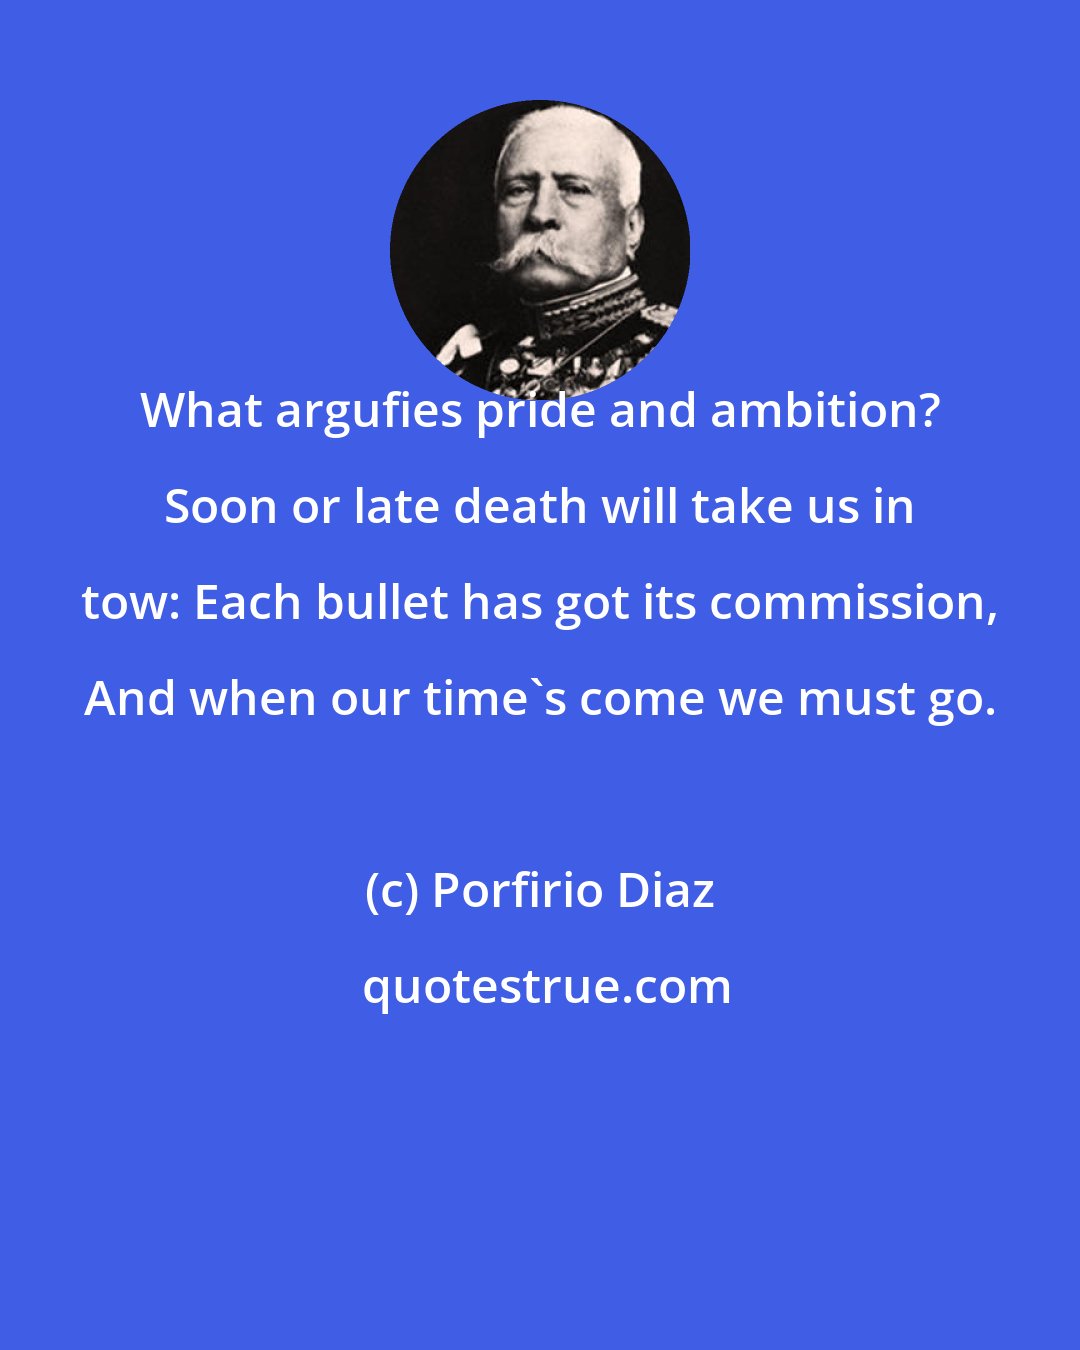 Porfirio Diaz: What argufies pride and ambition? Soon or late death will take us in tow: Each bullet has got its commission, And when our time's come we must go.